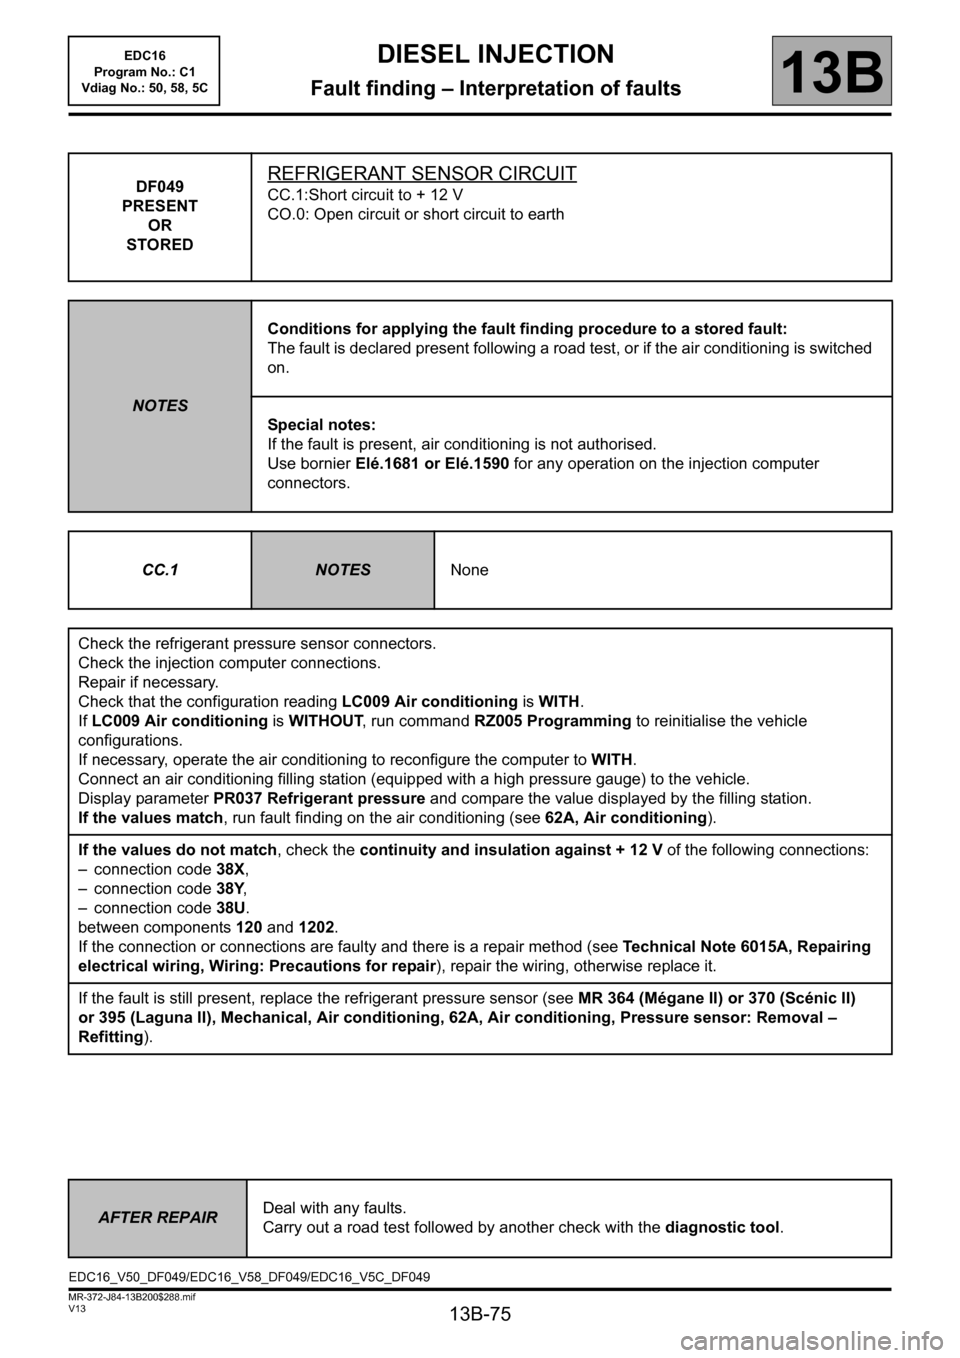 RENAULT SCENIC 2011 J95 / 3.G Engine And Peripherals EDC16 Manual PDF 13B-75
MR-372-J84-13B200$288.mif
V13
13B
DIESEL INJECTION
Fault finding – Interpretation of faults
DF049
PRESENT
OR
STOREDREFRIGERANT SENSOR CIRCUIT
CC.1:Short circuit to + 12 V
CO.0: Open circuit o